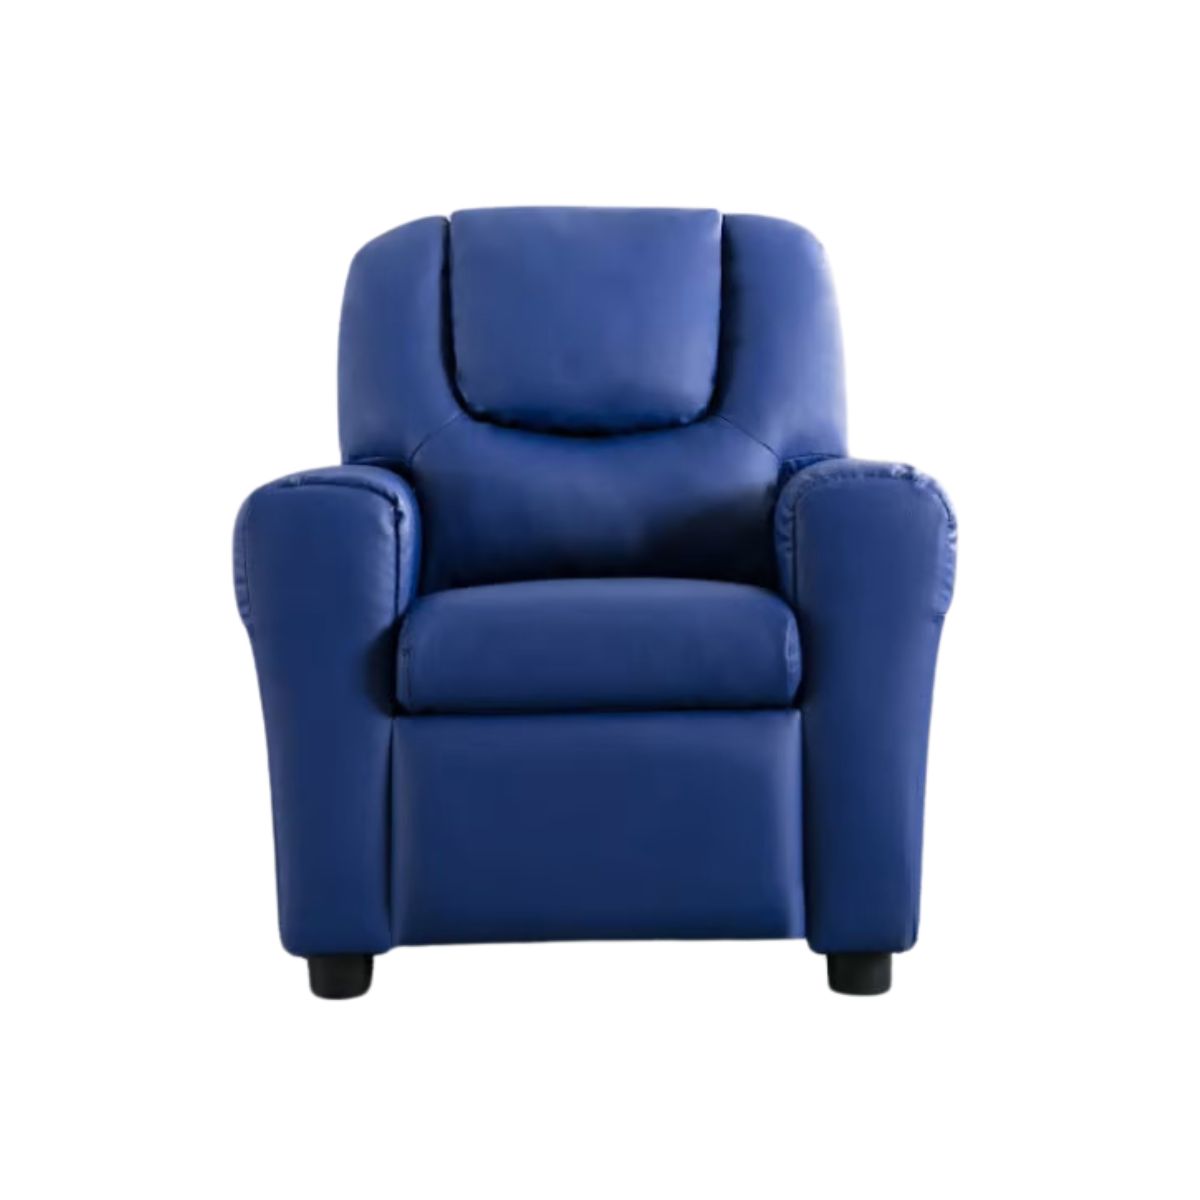 Kids Recliner Chair with Cup Holder Blue - 1